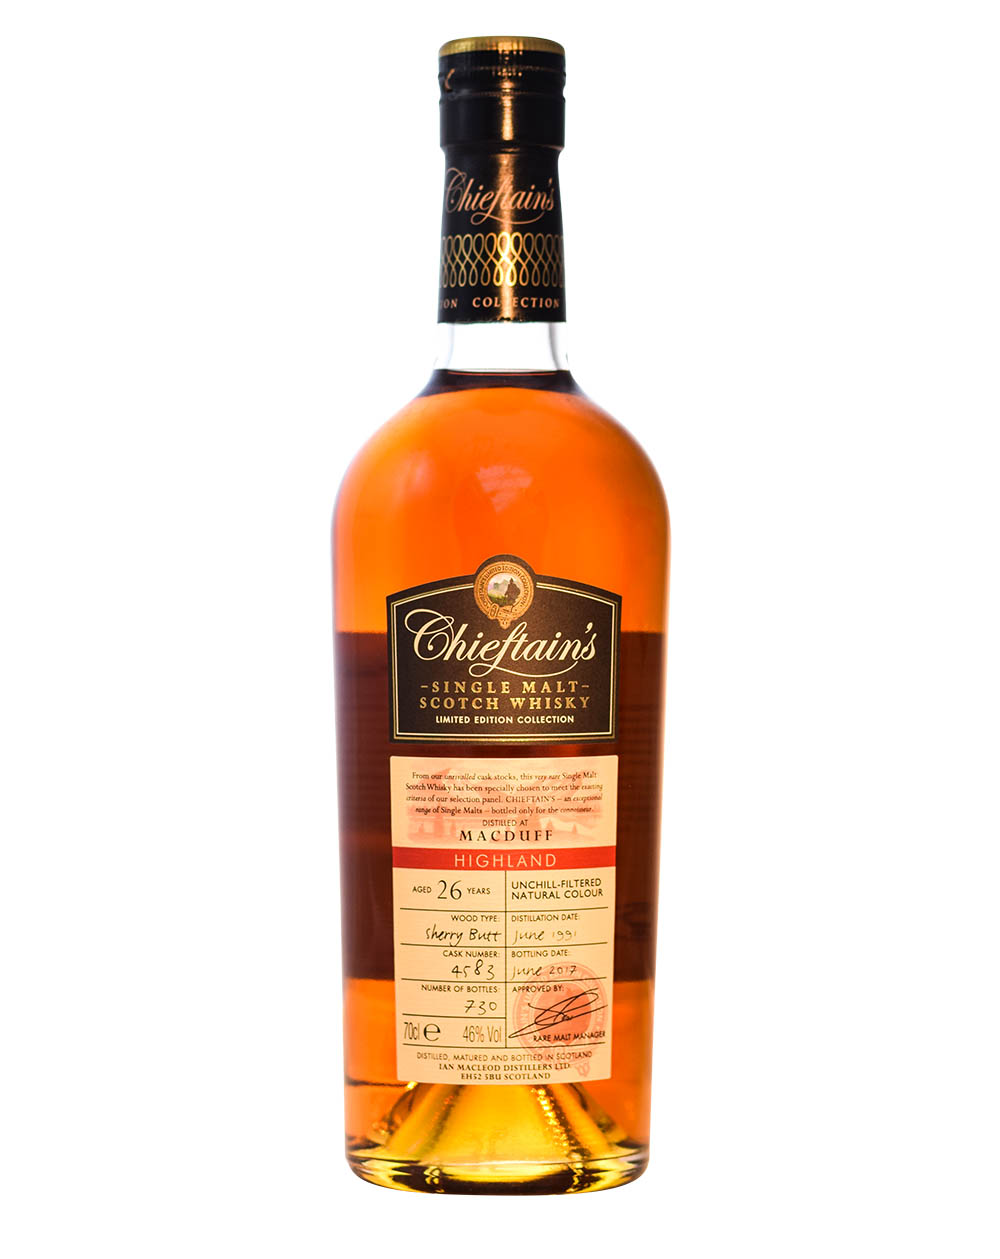 Macduff 1991 Chieftain's (26 Years Old) Musthave Malts MHM Pro